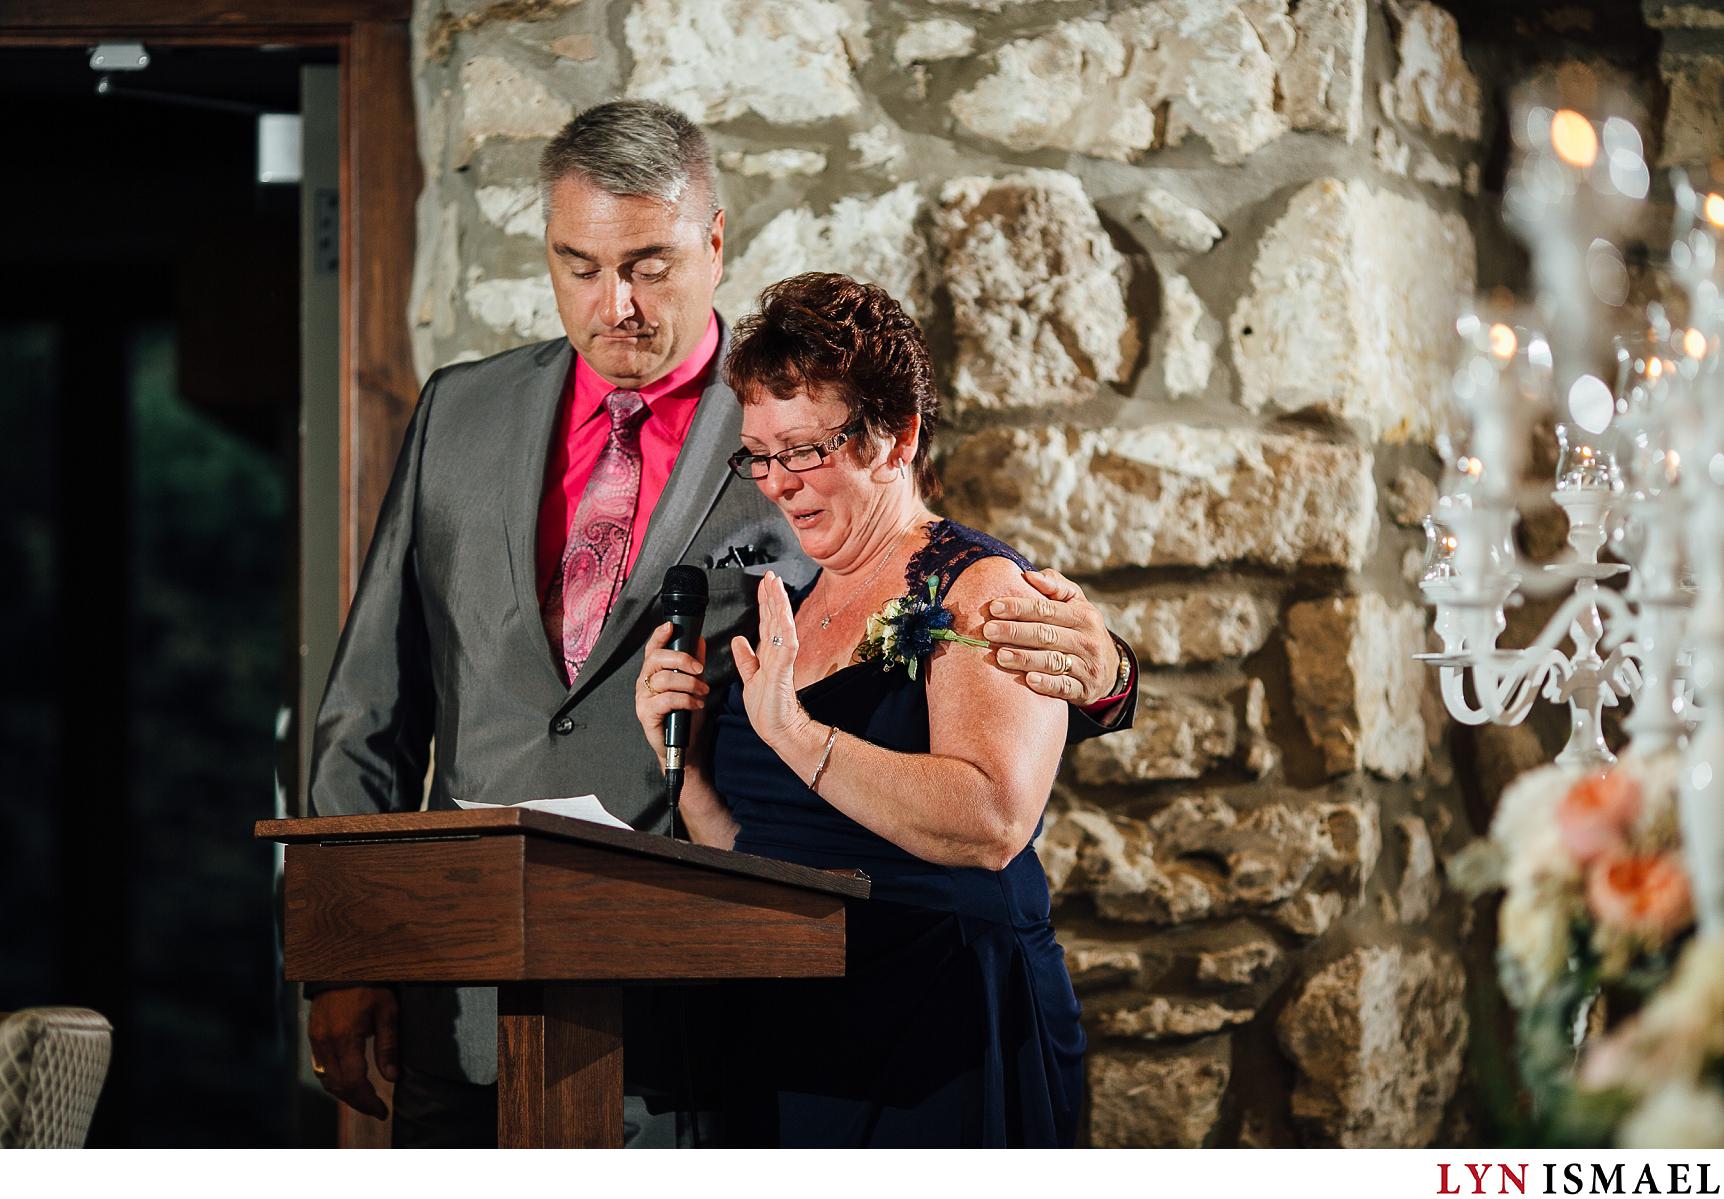 A mother of the groom becomes emotional at her speech at her son's wedding reception.